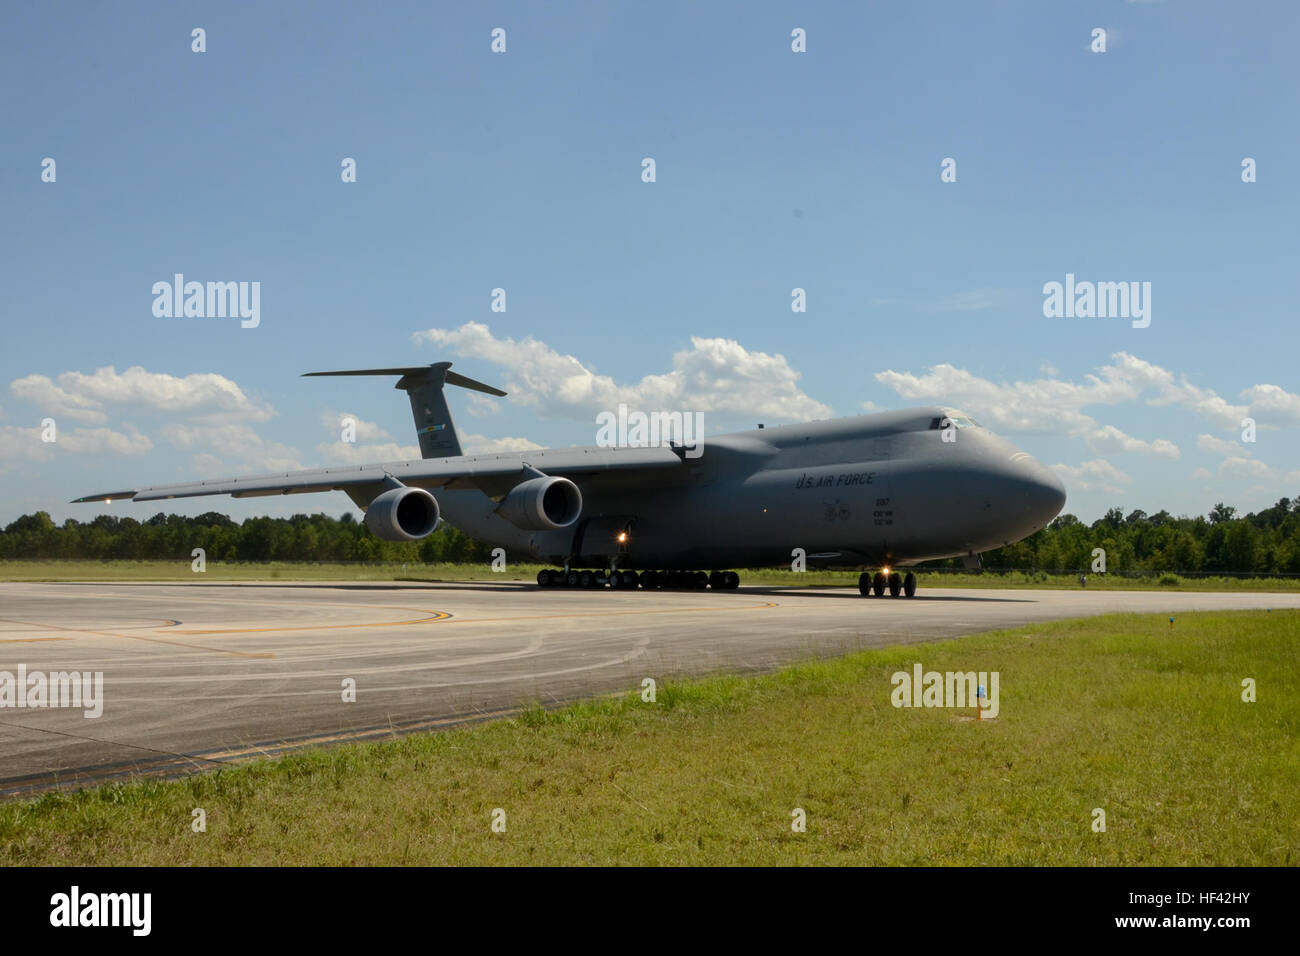 A U.S. Air Force Lockheed C-5 Galaxy transport aircraft taxis onto the runway at McEntire Joint National Guard Base, S.C., July 8, 2016. Approximately 300 U.S. Airmen and 12 F-16 Fighting Falcon jets from the 169th Fighter Wing at McEntire JNGB, S.C., are deploying to Osan Air Base, Republic of Korea, as the 157th Expeditionary Fighter Squadron in support of the U.S. Pacific Command Theater Security Package. (U.S. Air National Guard photo by Airman 1st Class Megan Floyd) SCANG TSP 747 Cargo Load 160708-Z-VD276-047 Stock Photo